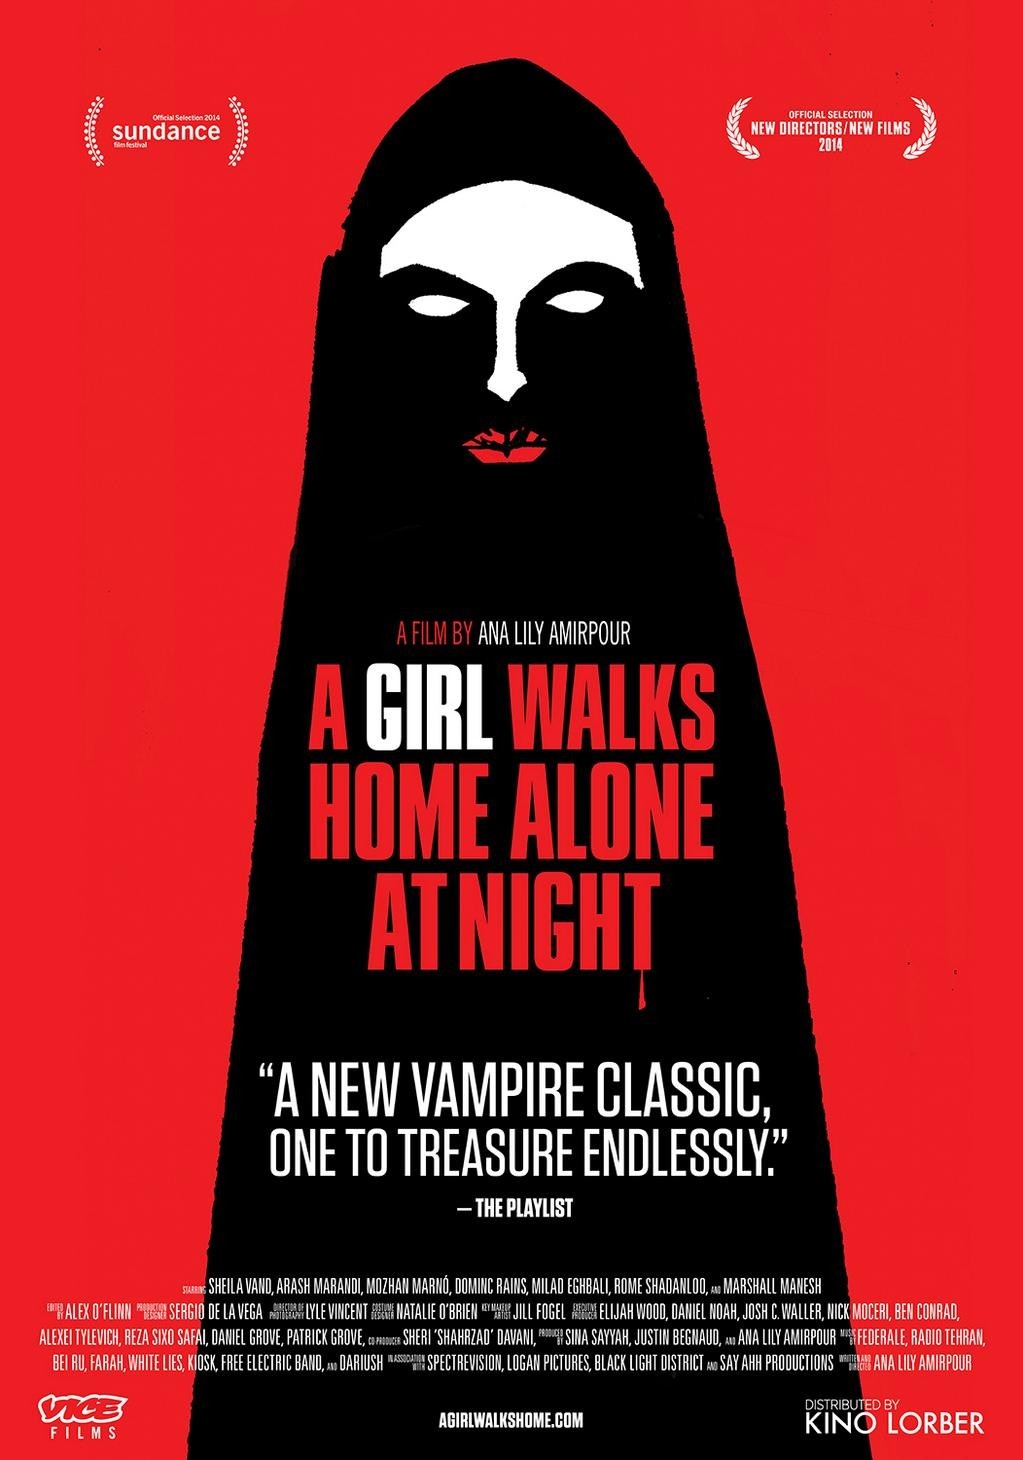 Poster of Kino Lorber's A Girl Walks Home Alone at Night (2015)